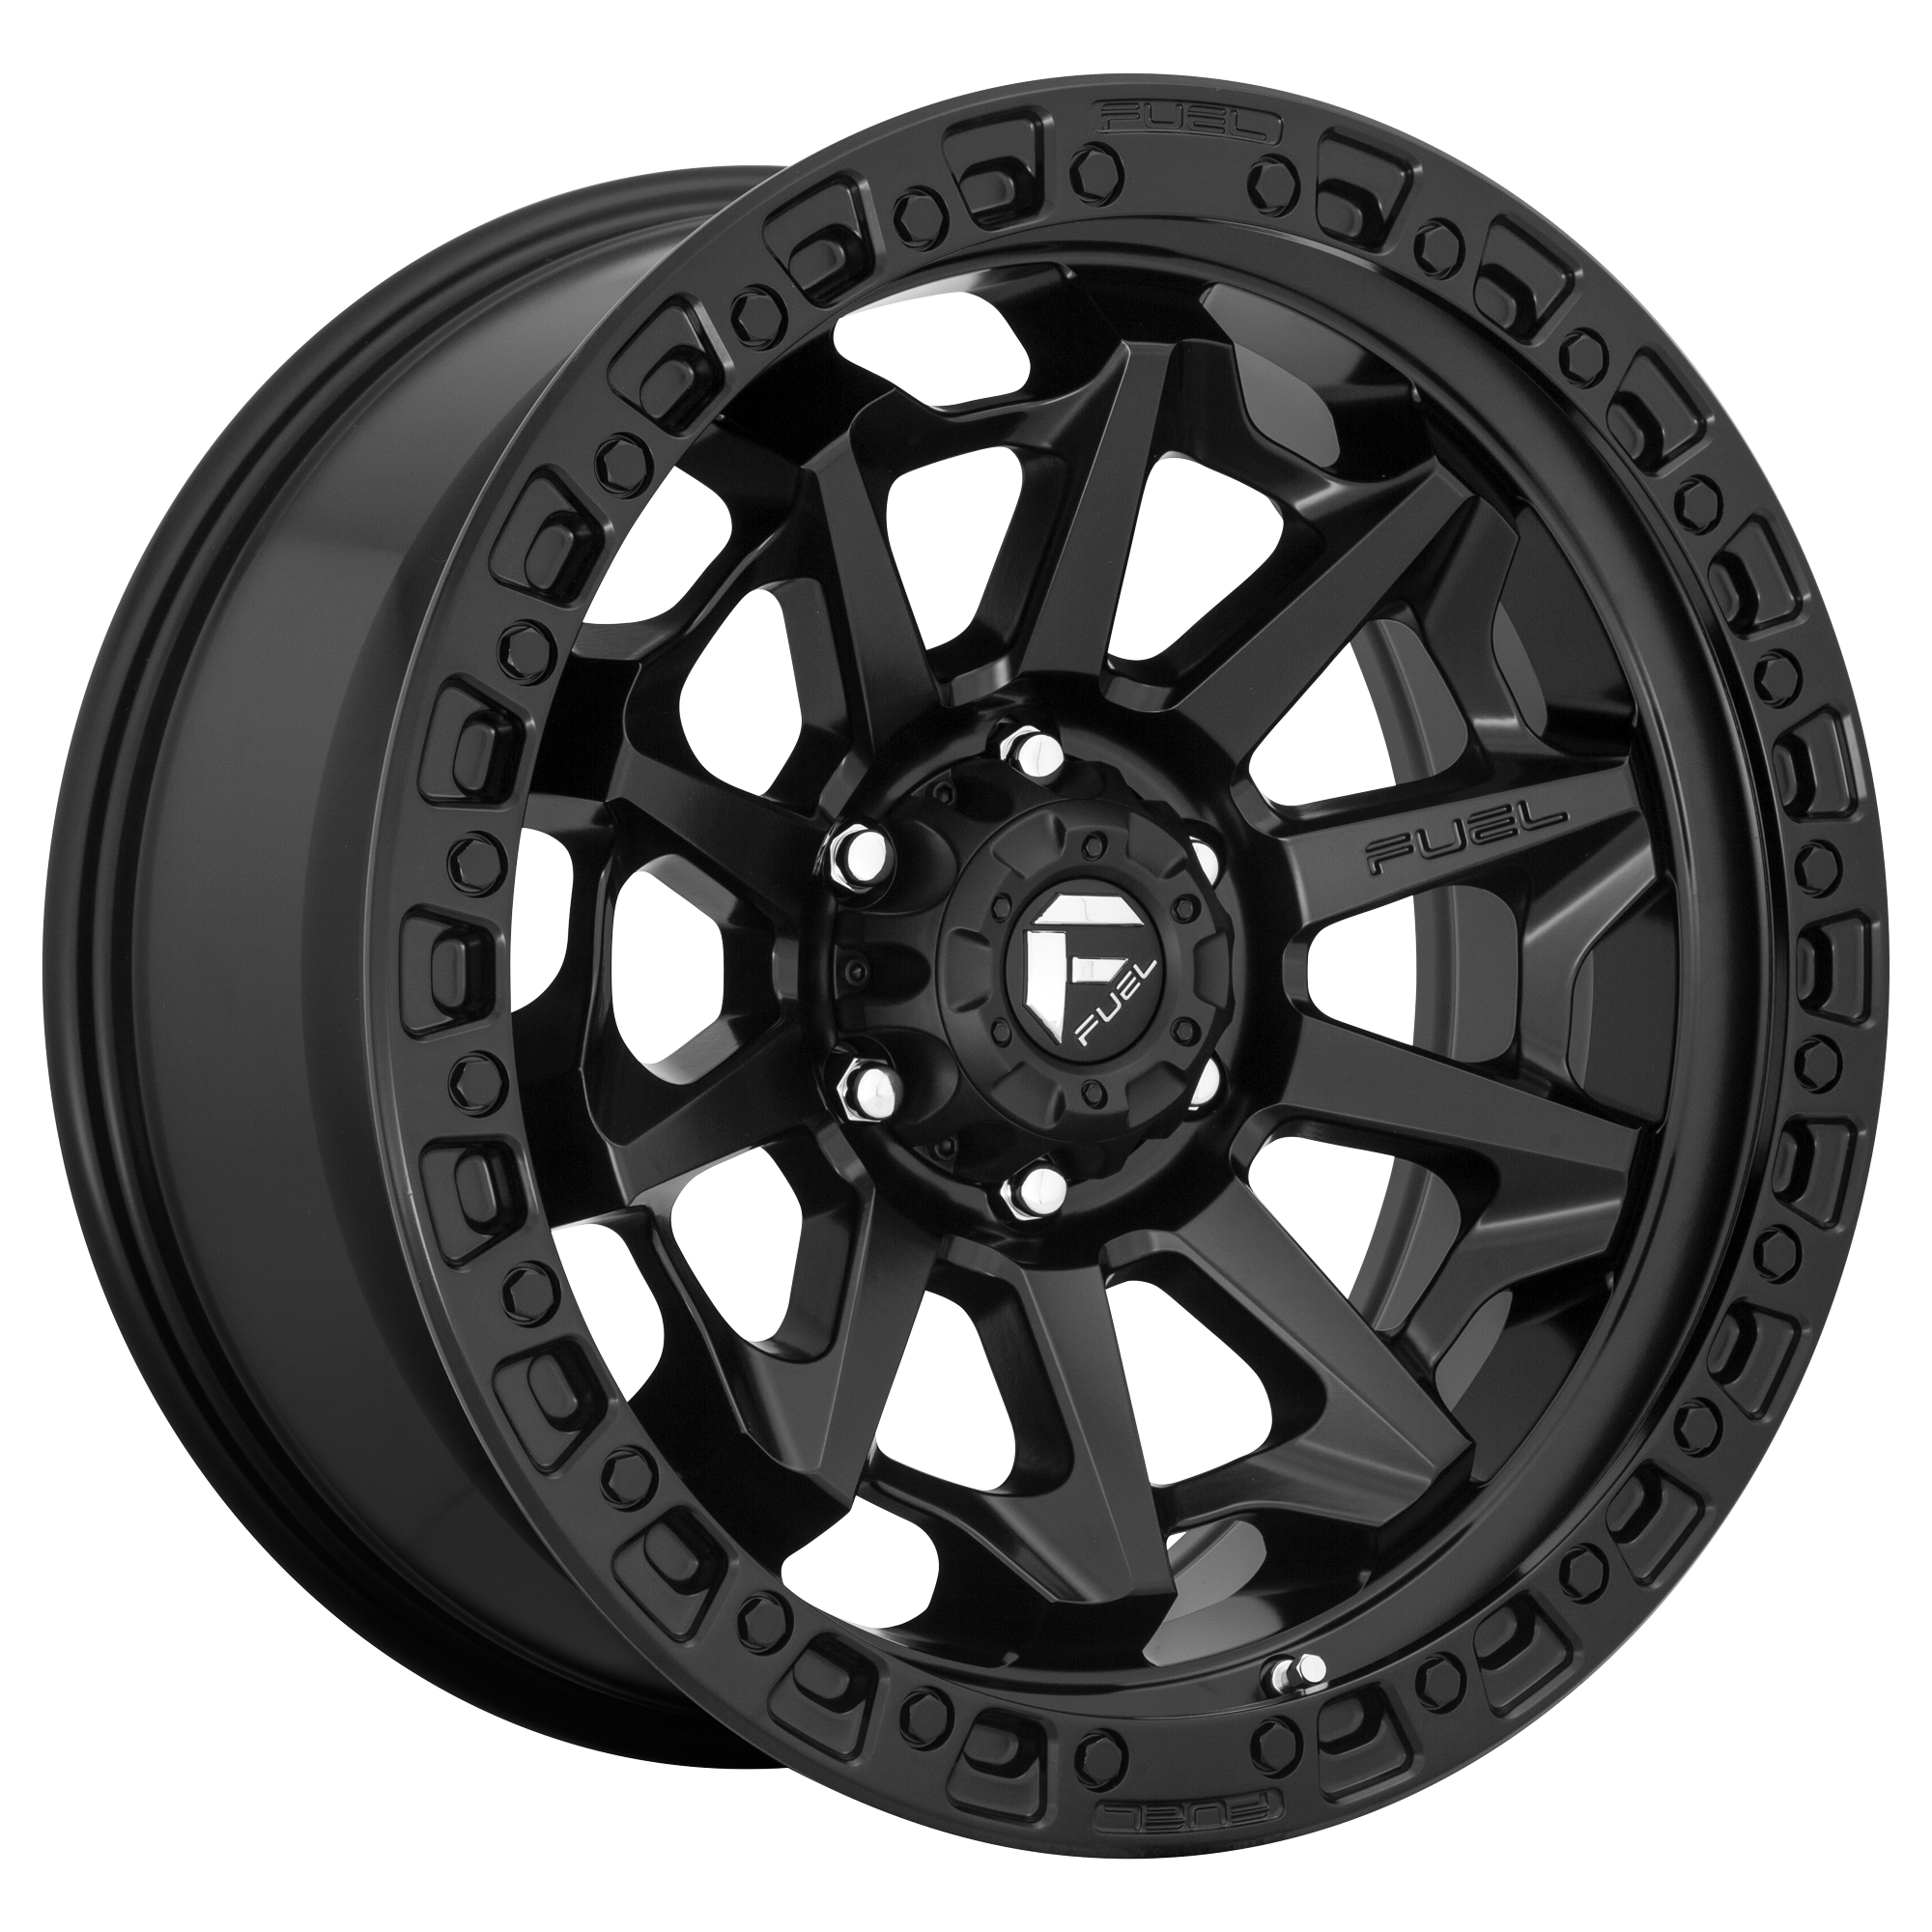 COVERT 18x9 5x127.00 MATTE BLACK (-12 mm) - Tires and Engine Performance